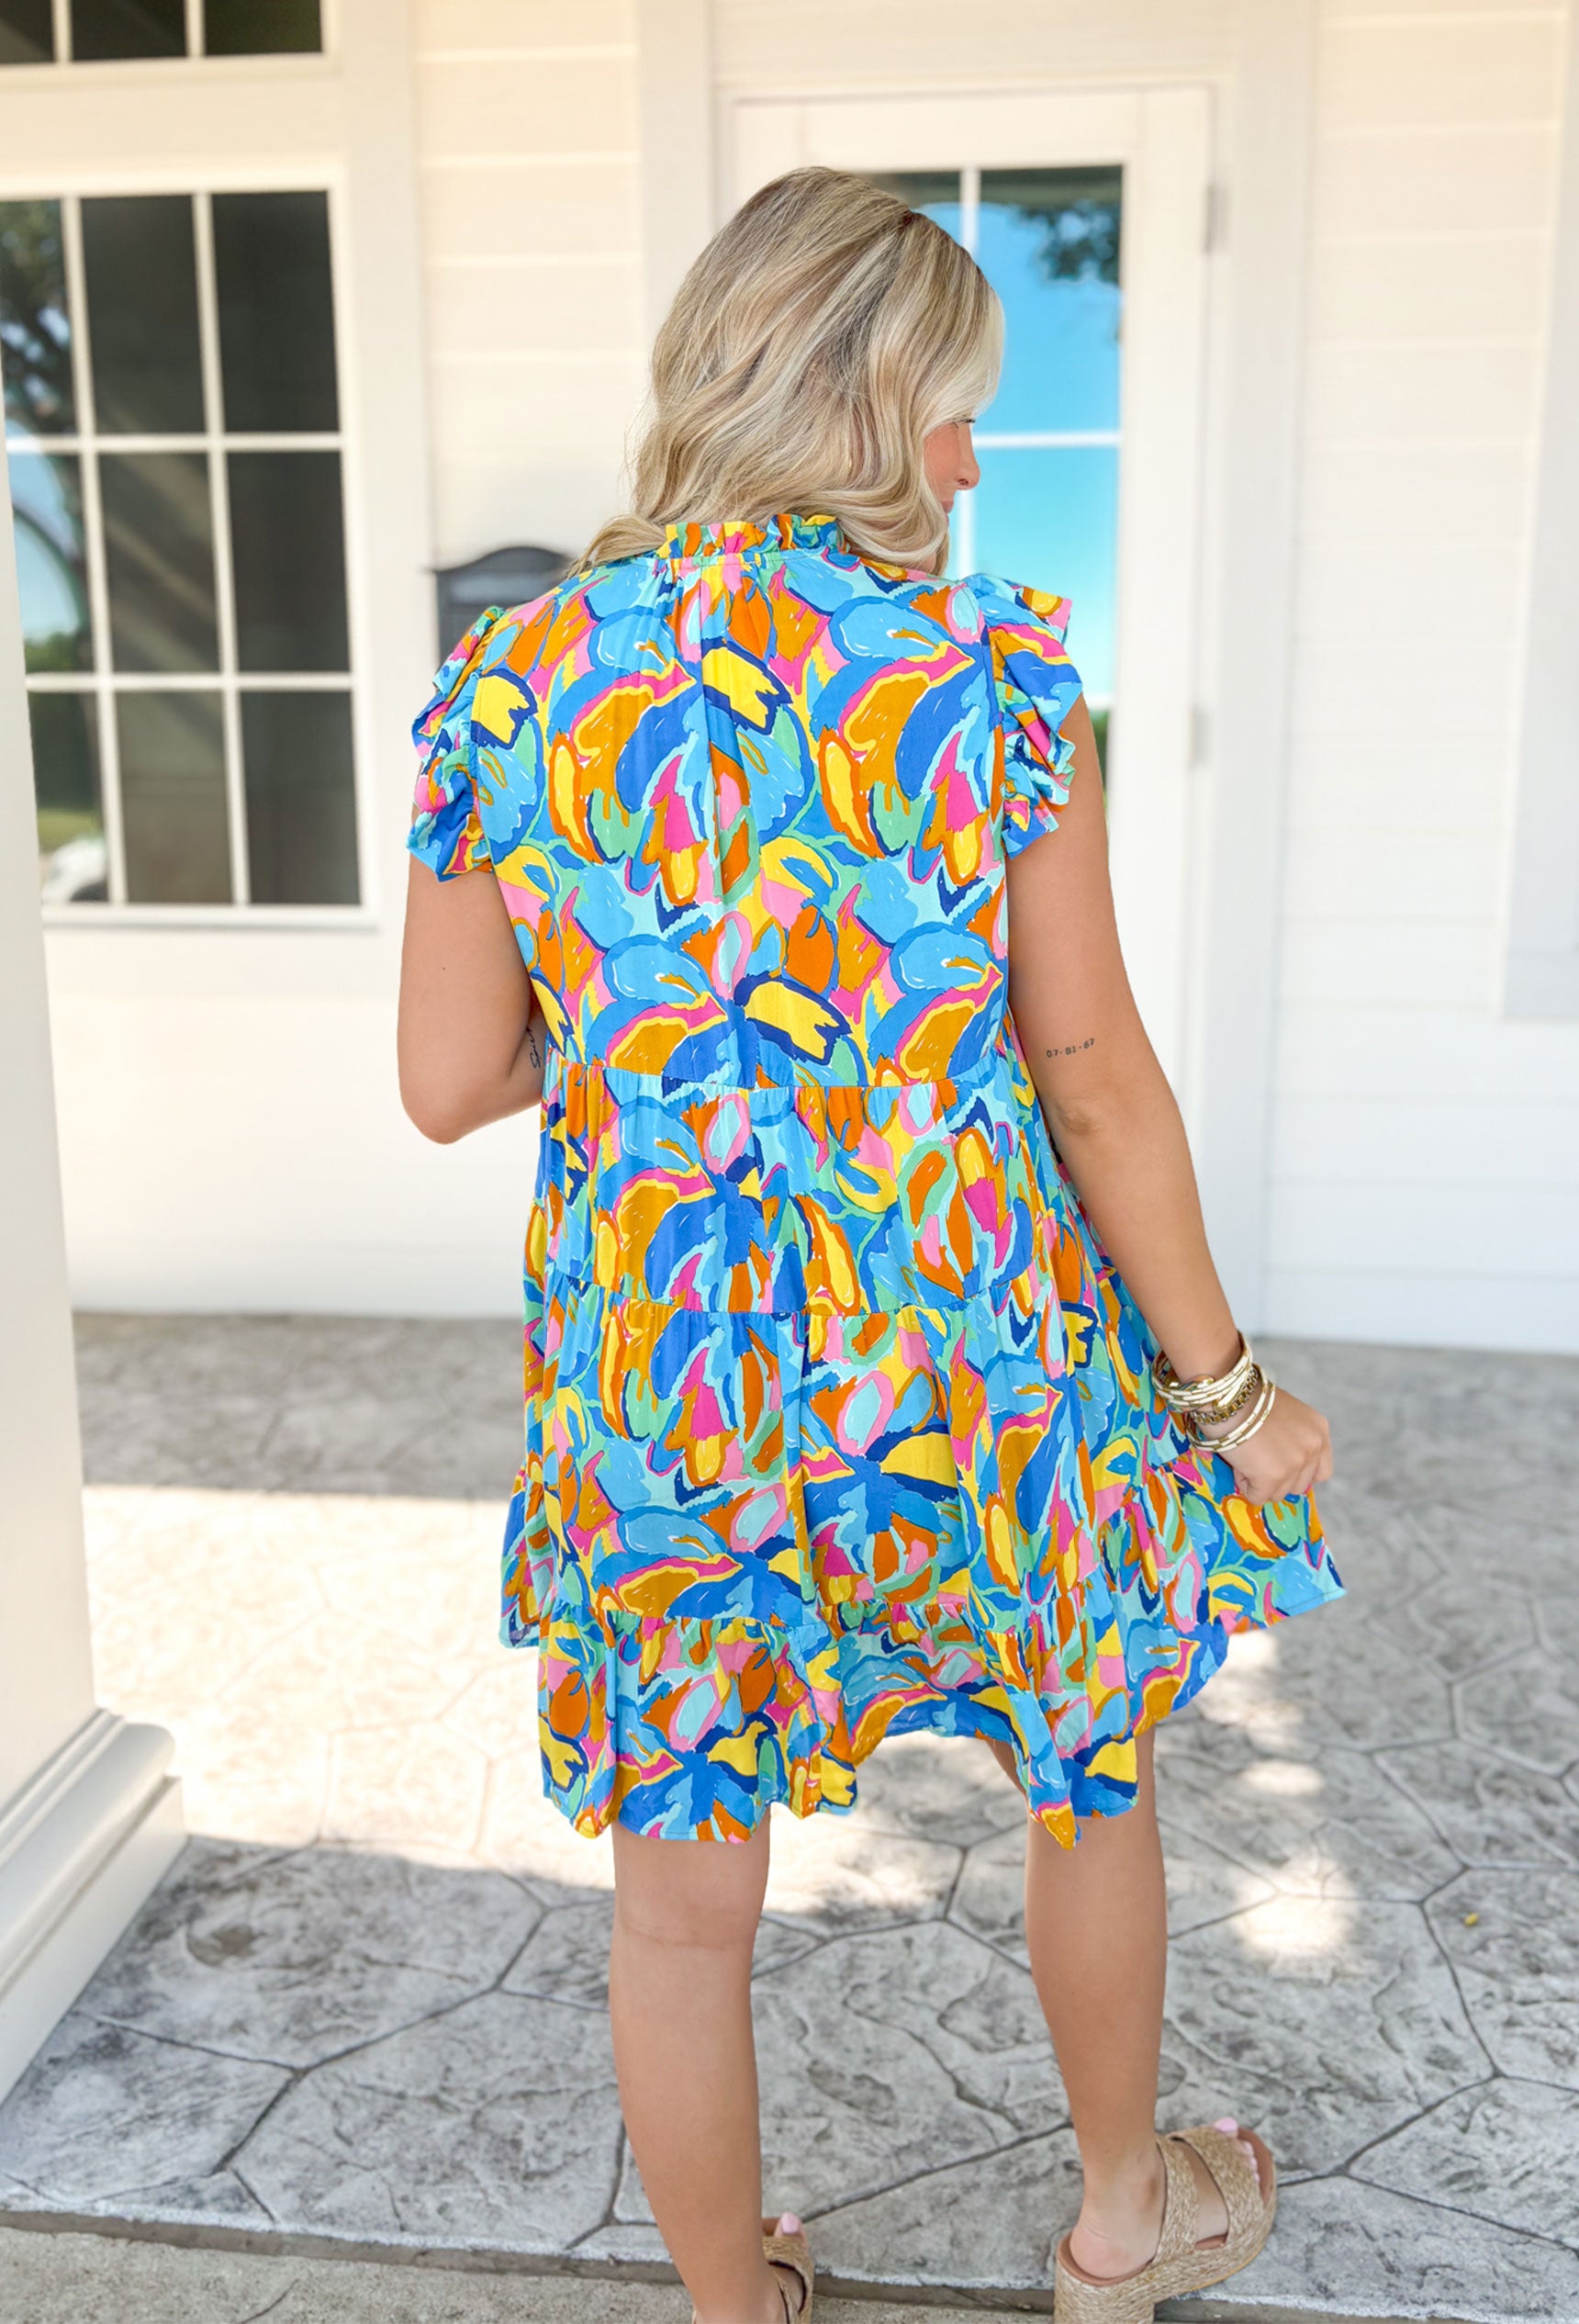 Sunny Forecast Dress, short ruffle sleeve dress with v-neck and tiering in a flower pattern in the colors cobalt, azure, royal blue, yellow, seafoam, orange, pink, and hot pink